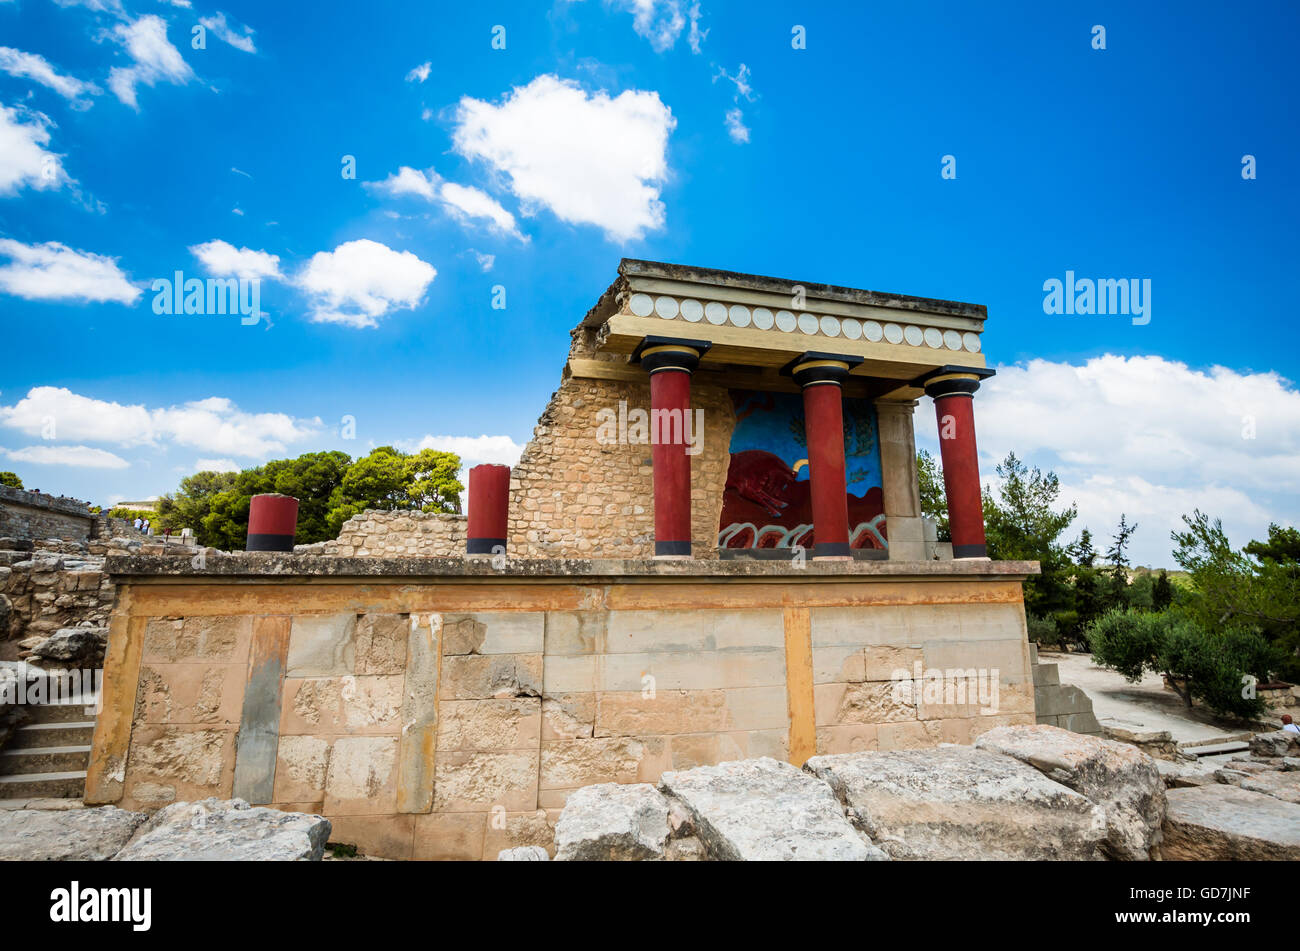 Knossos palace, Crete island, Greece. Detail of ancient ruins of famous Minoan palace of Knossos. Stock Photo